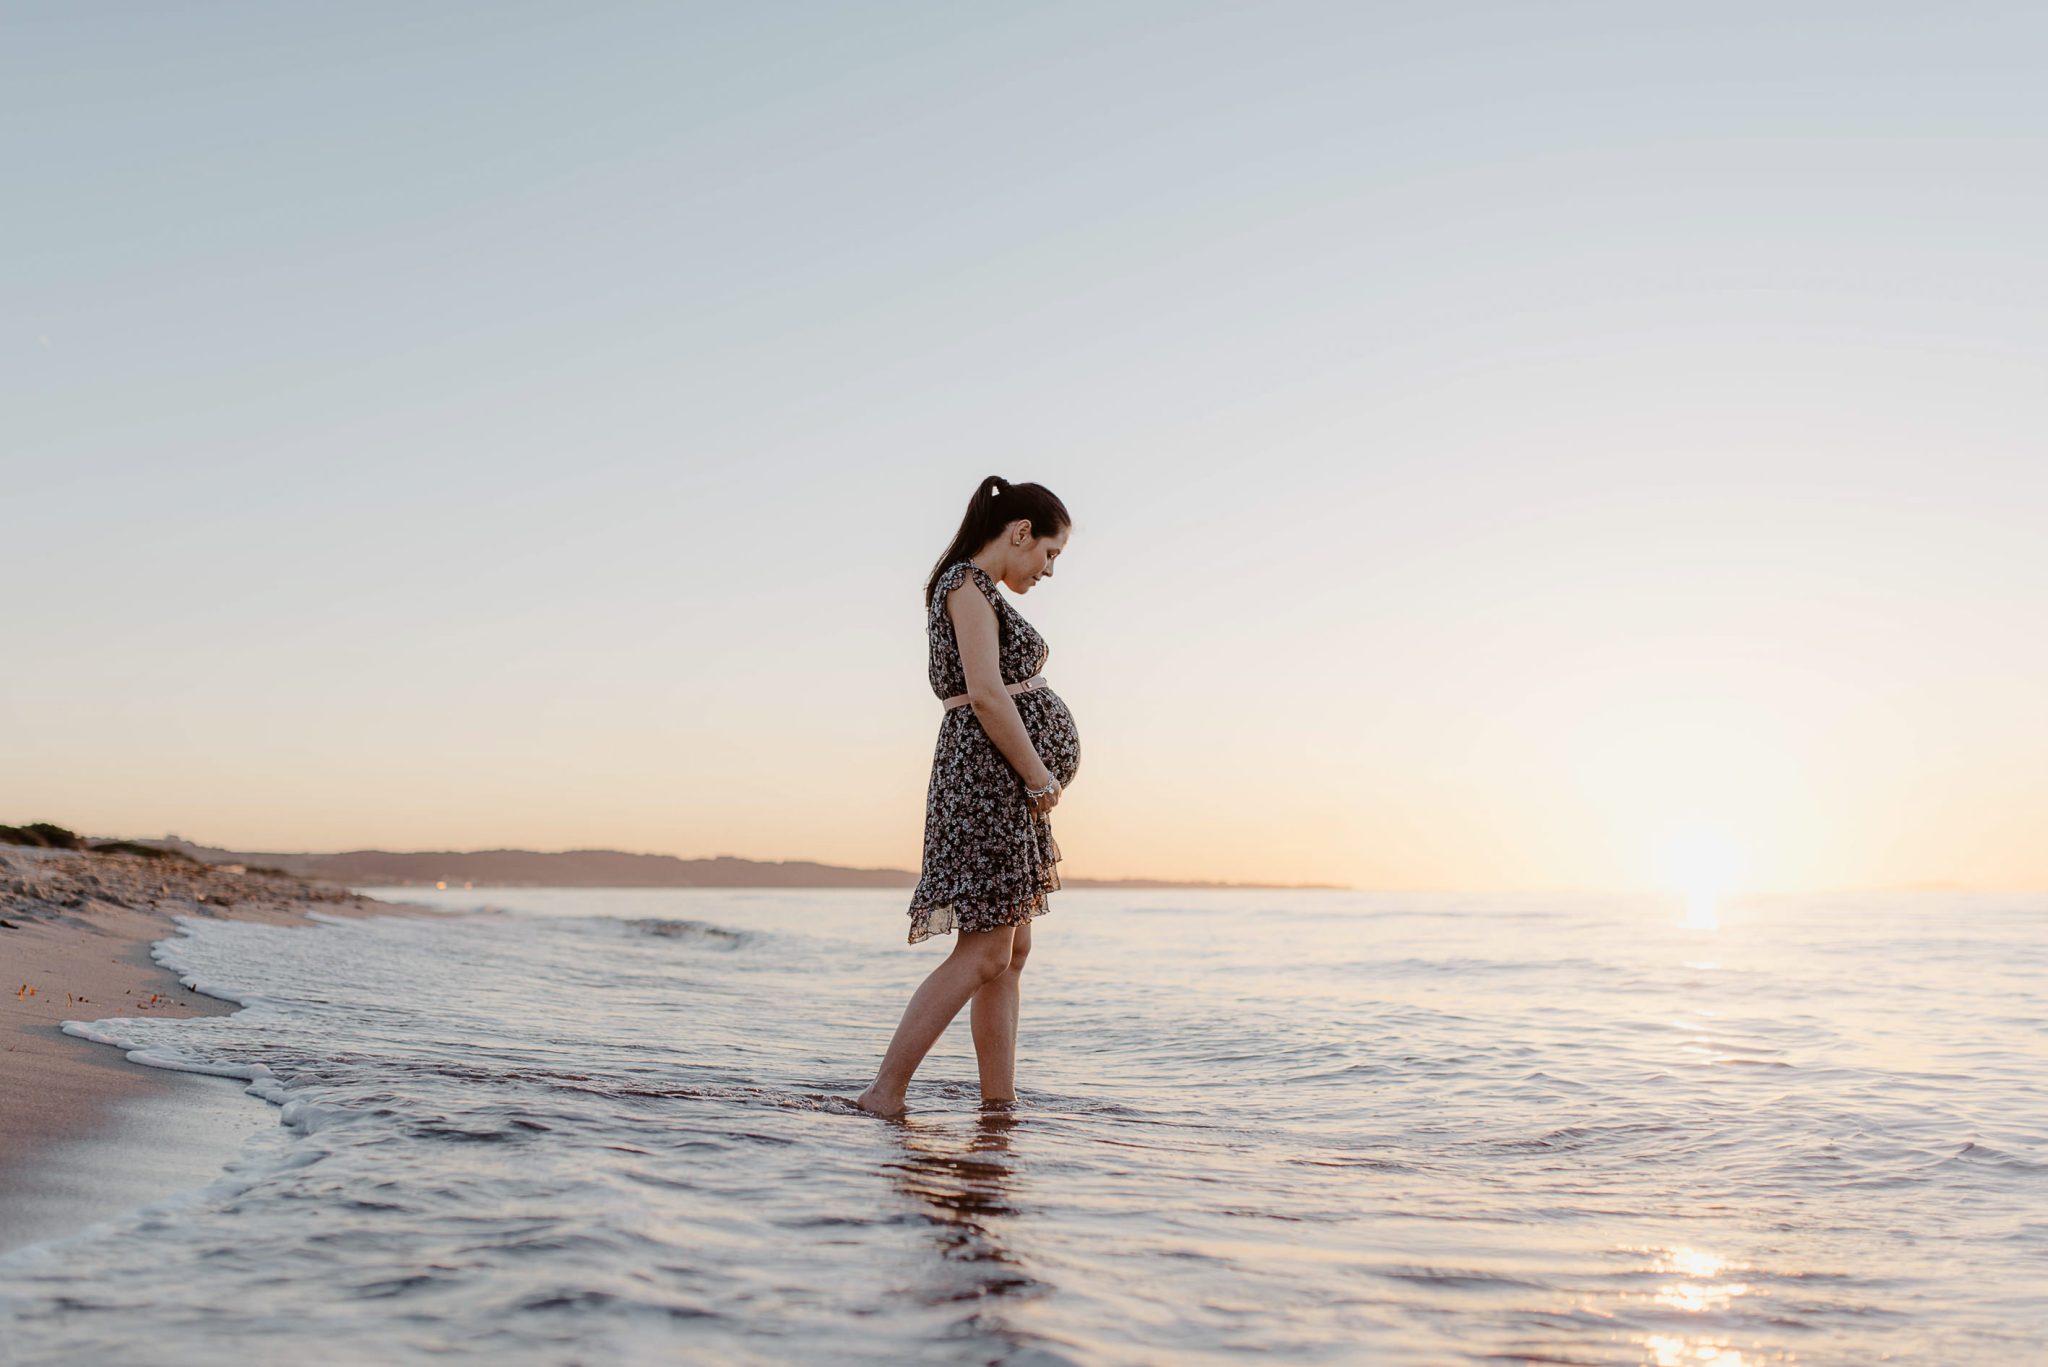 Why Choose Sardinia for Your Maternity Photoshoot